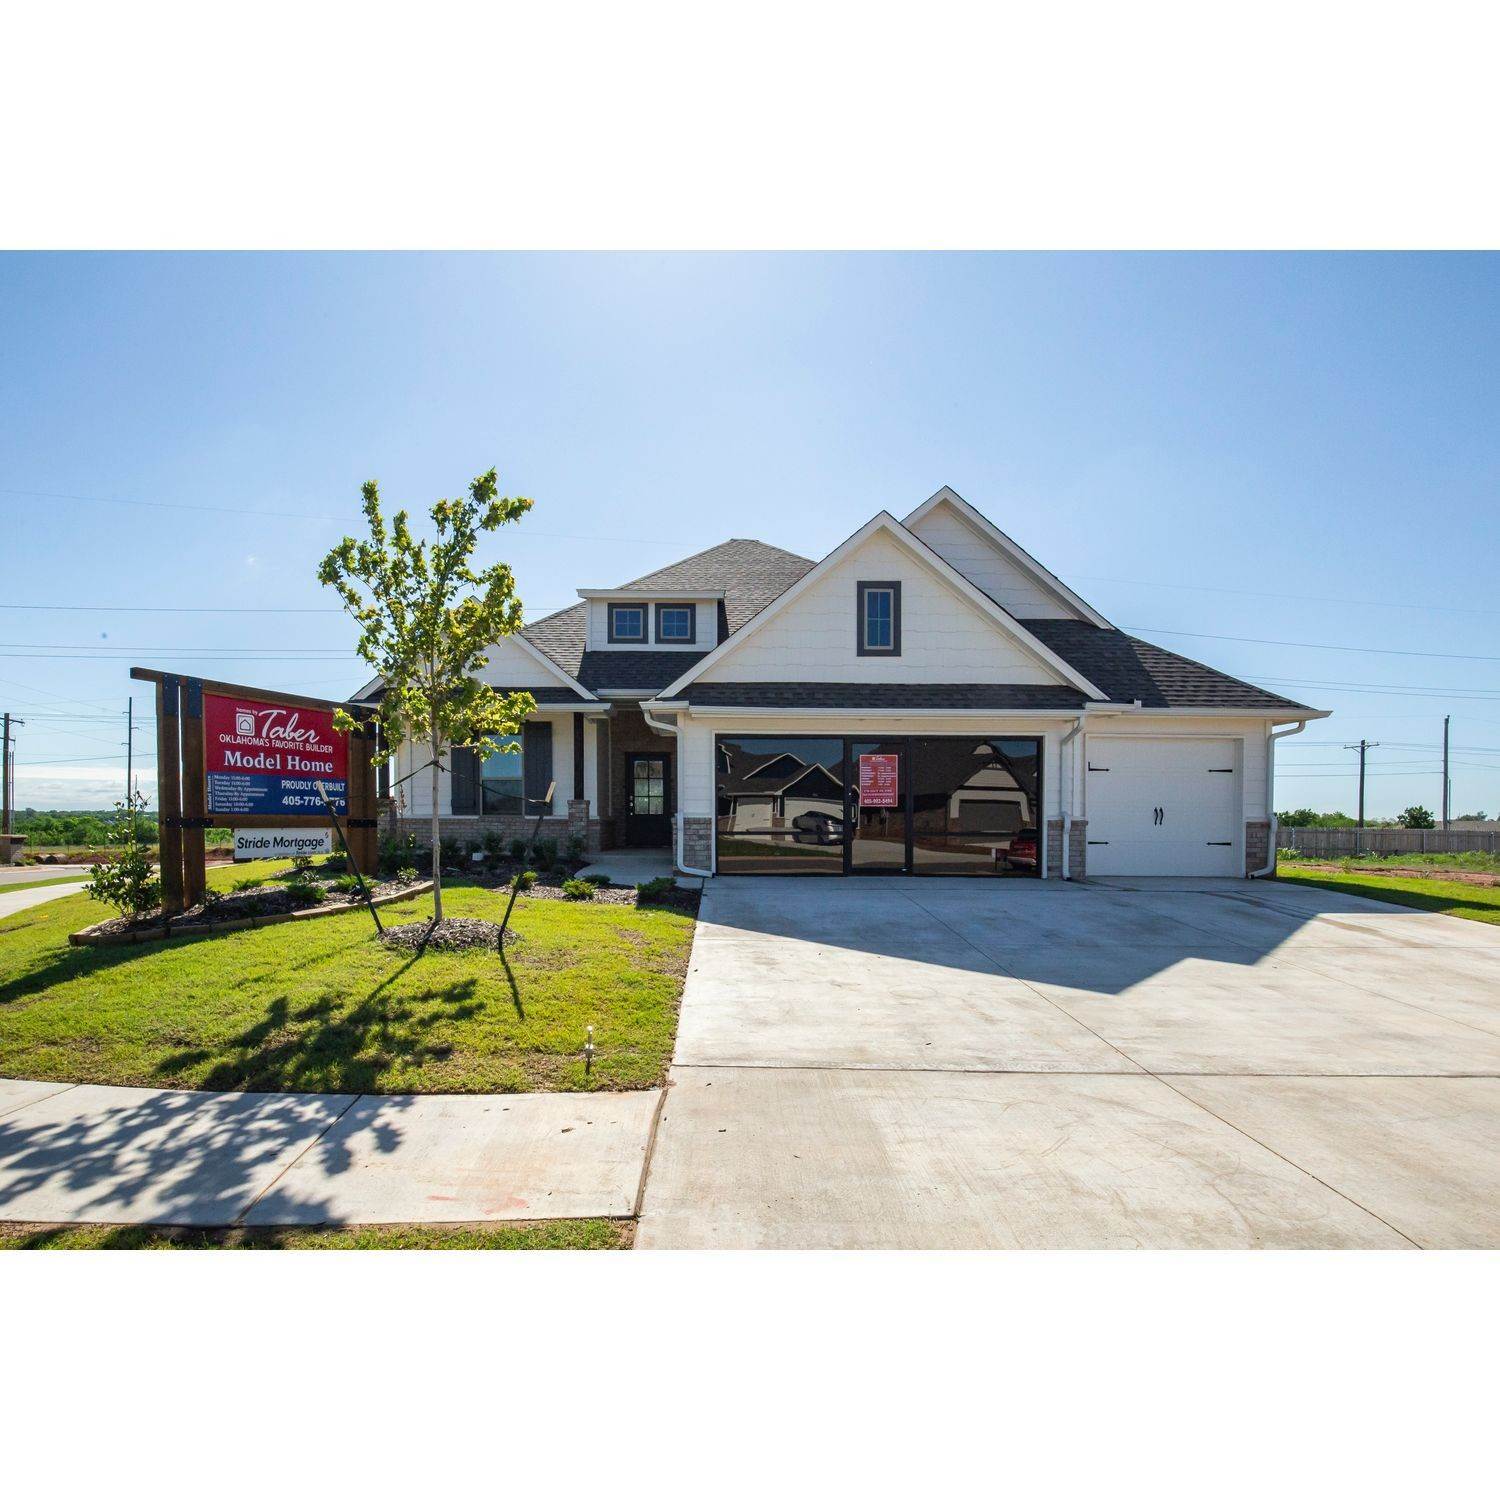 2. Broadmoore Heights building at 2800 Heather Haven, Moore, OK 73160